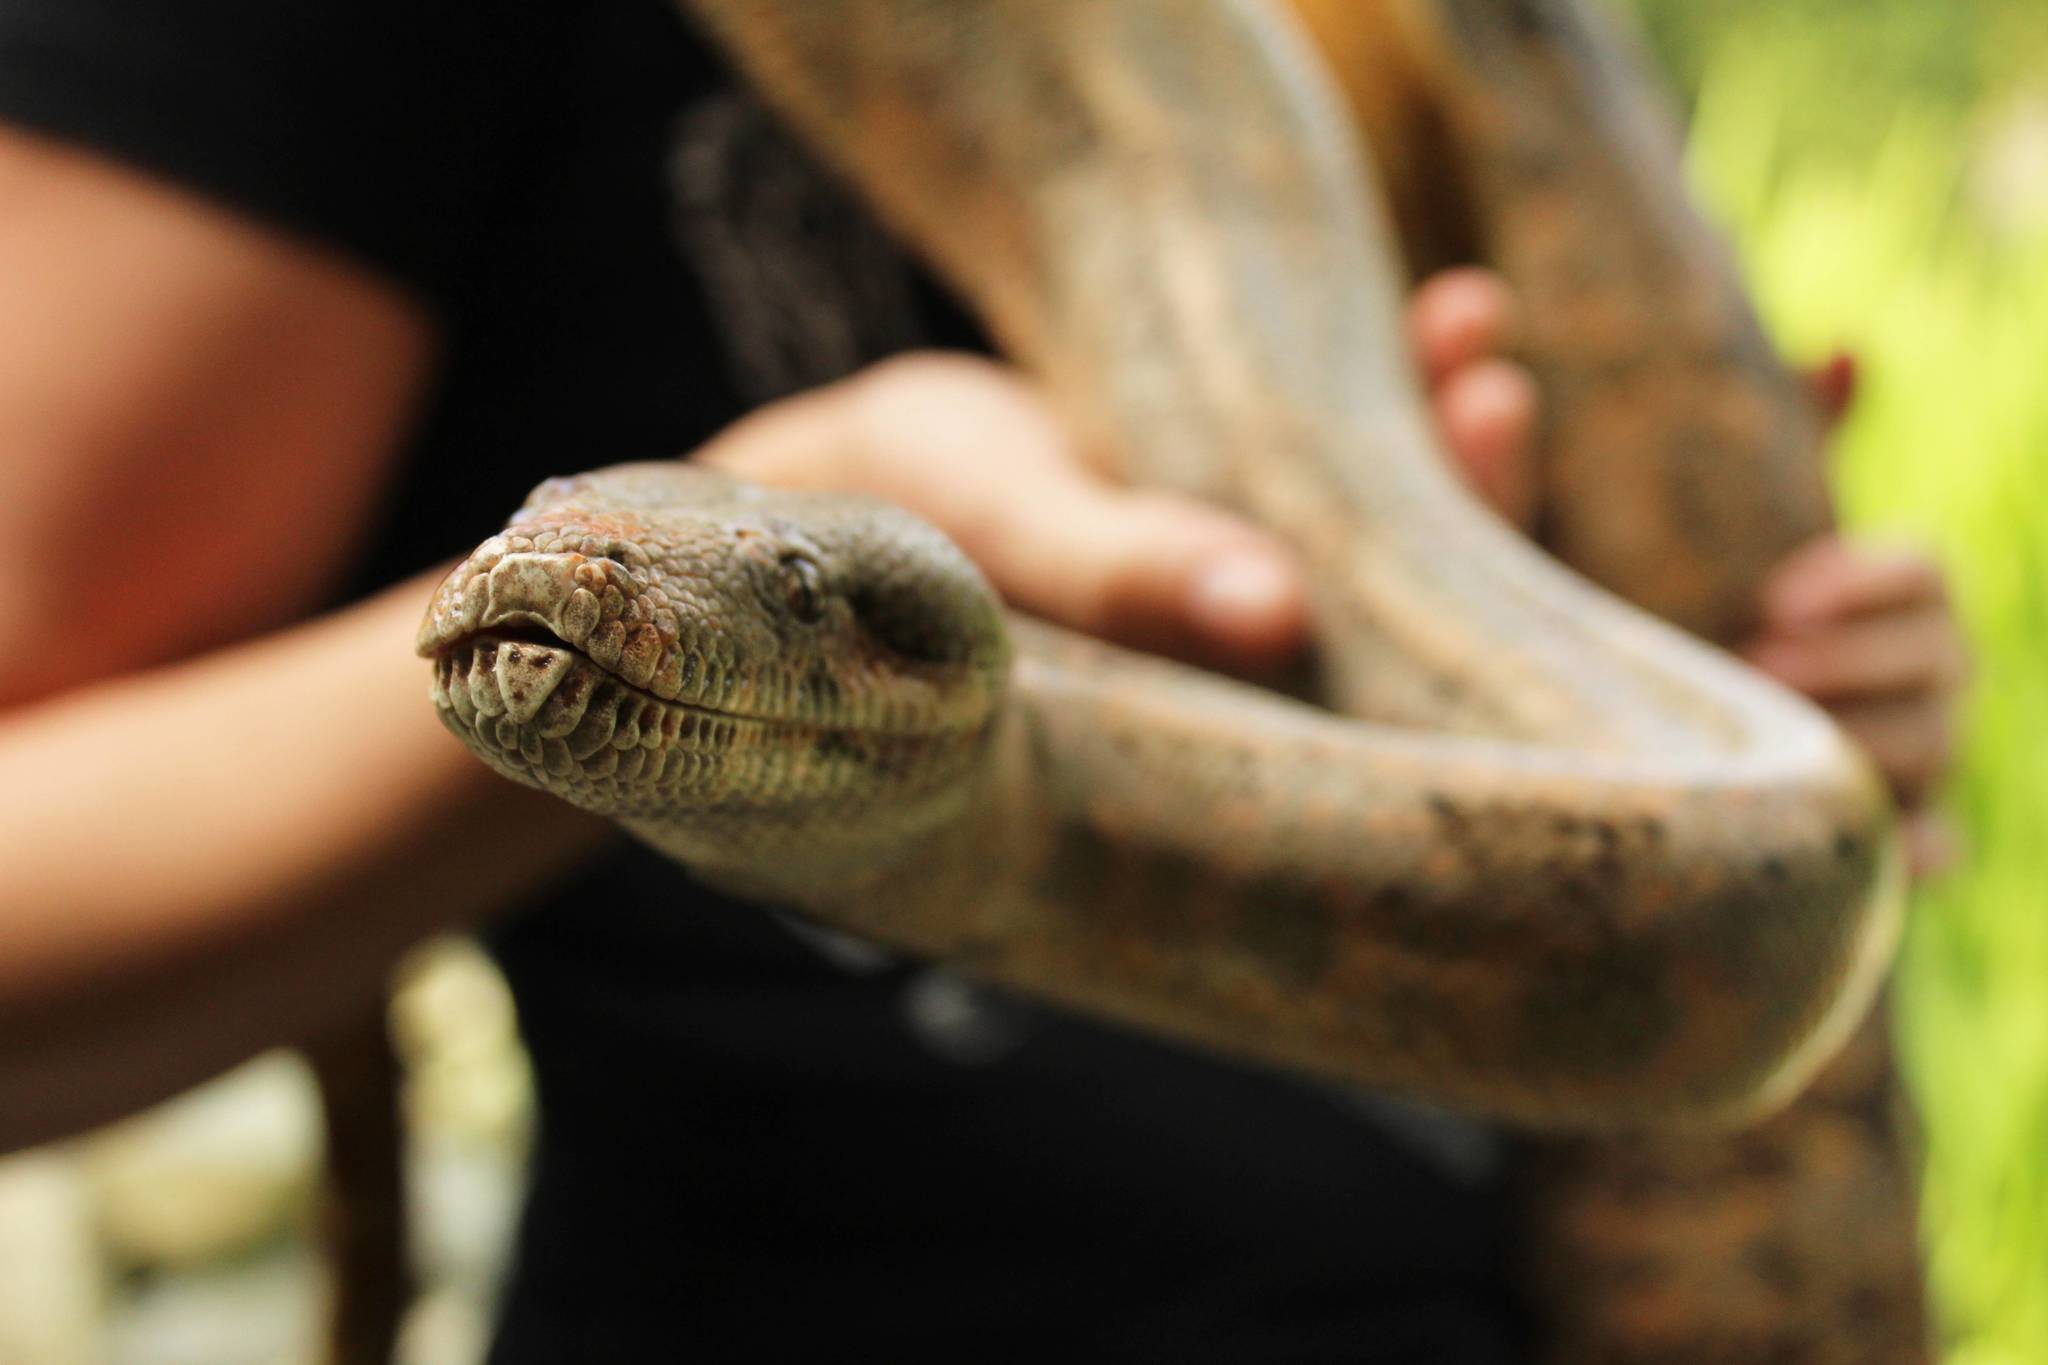 Peaches the boa constrictor enjoys the sunny day. (Photo by Karina Andrew/Whidbey News-Times)